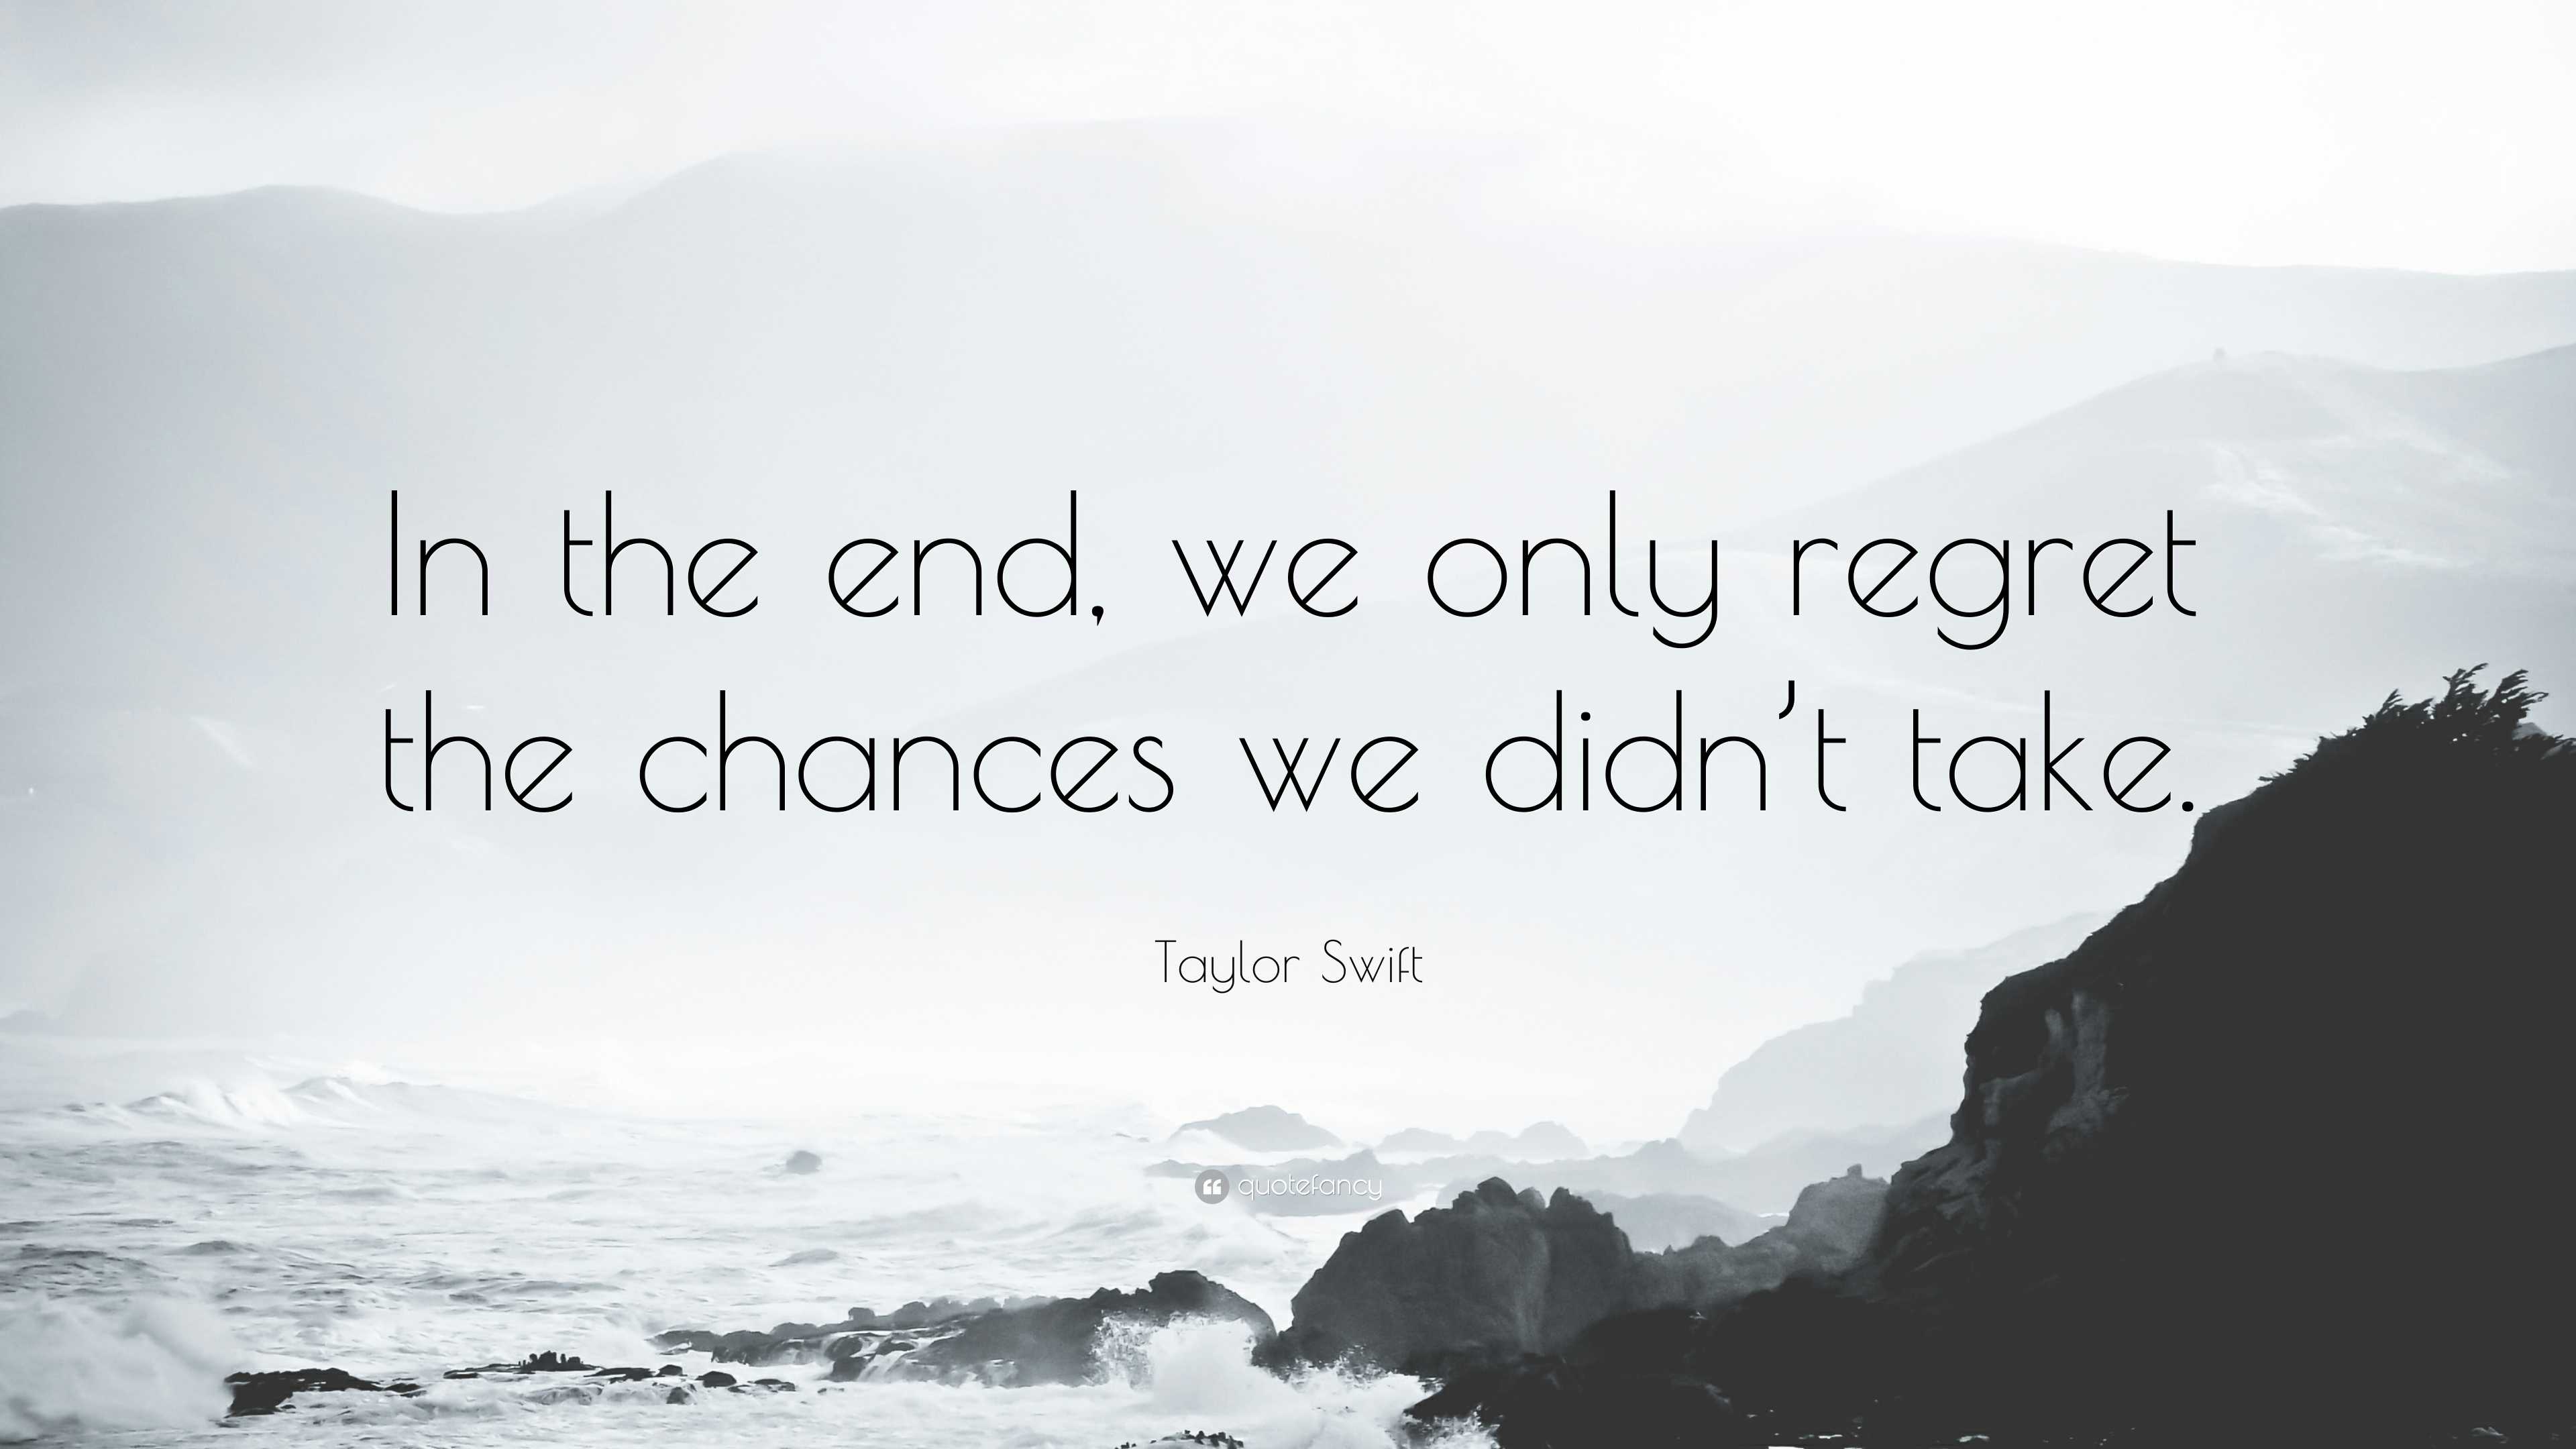 Taylor Swift Quote: “In the end, we only regret the chances we